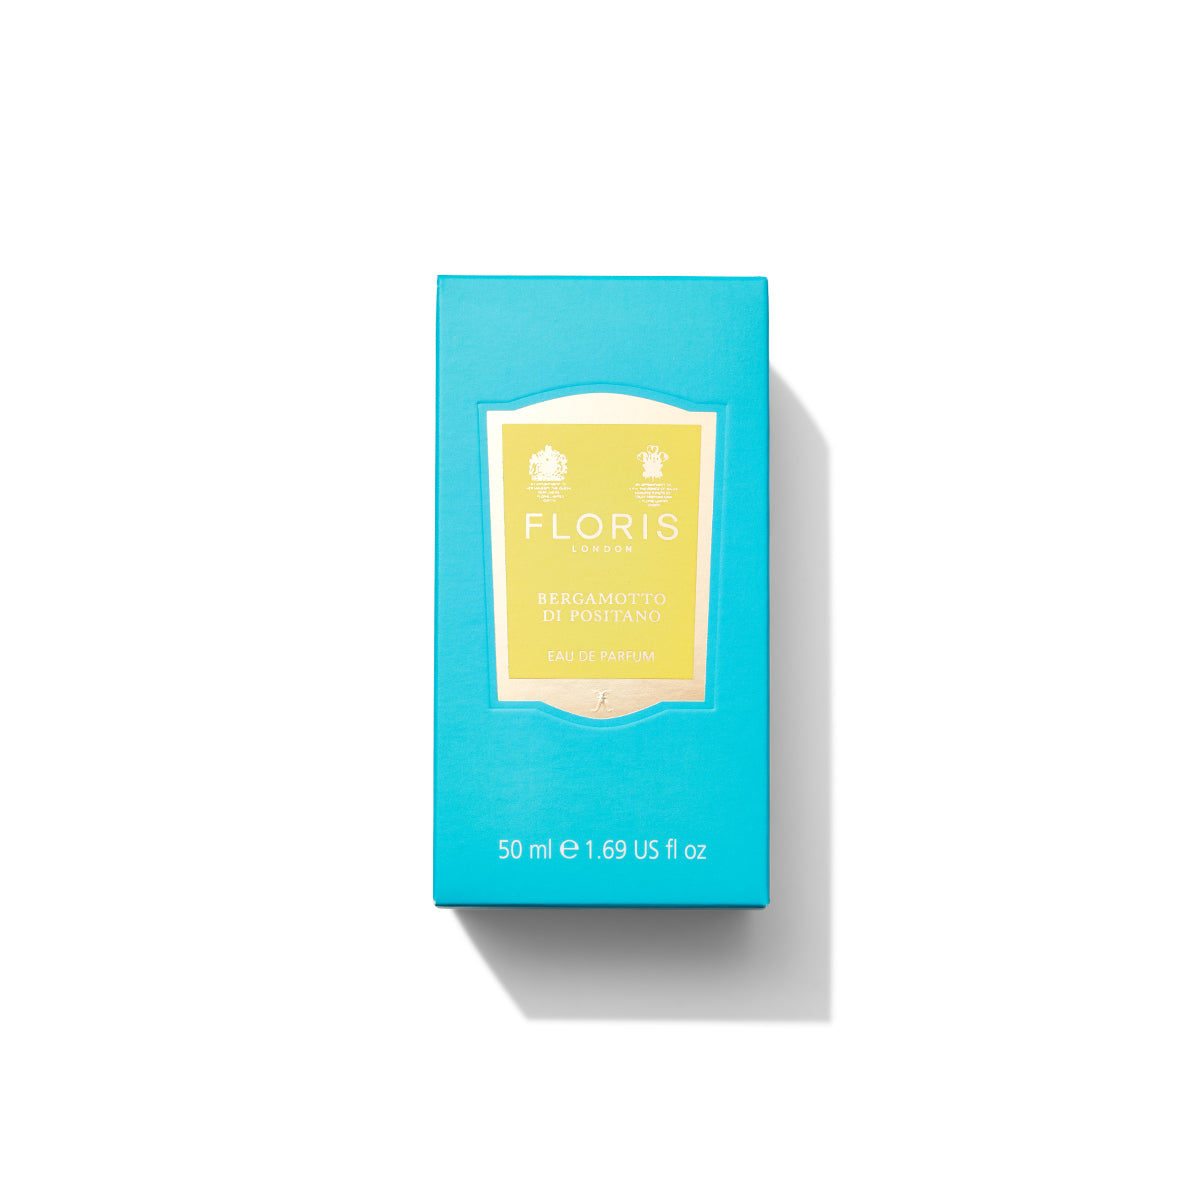 A turquoise box of Bergamotto di Positano Eau de Parfum, 50 ml, by Floris London, with a yellow label in the center, evokes the essence of a Mediterranean sea breeze with its fresh bergamot and warm marine notes.